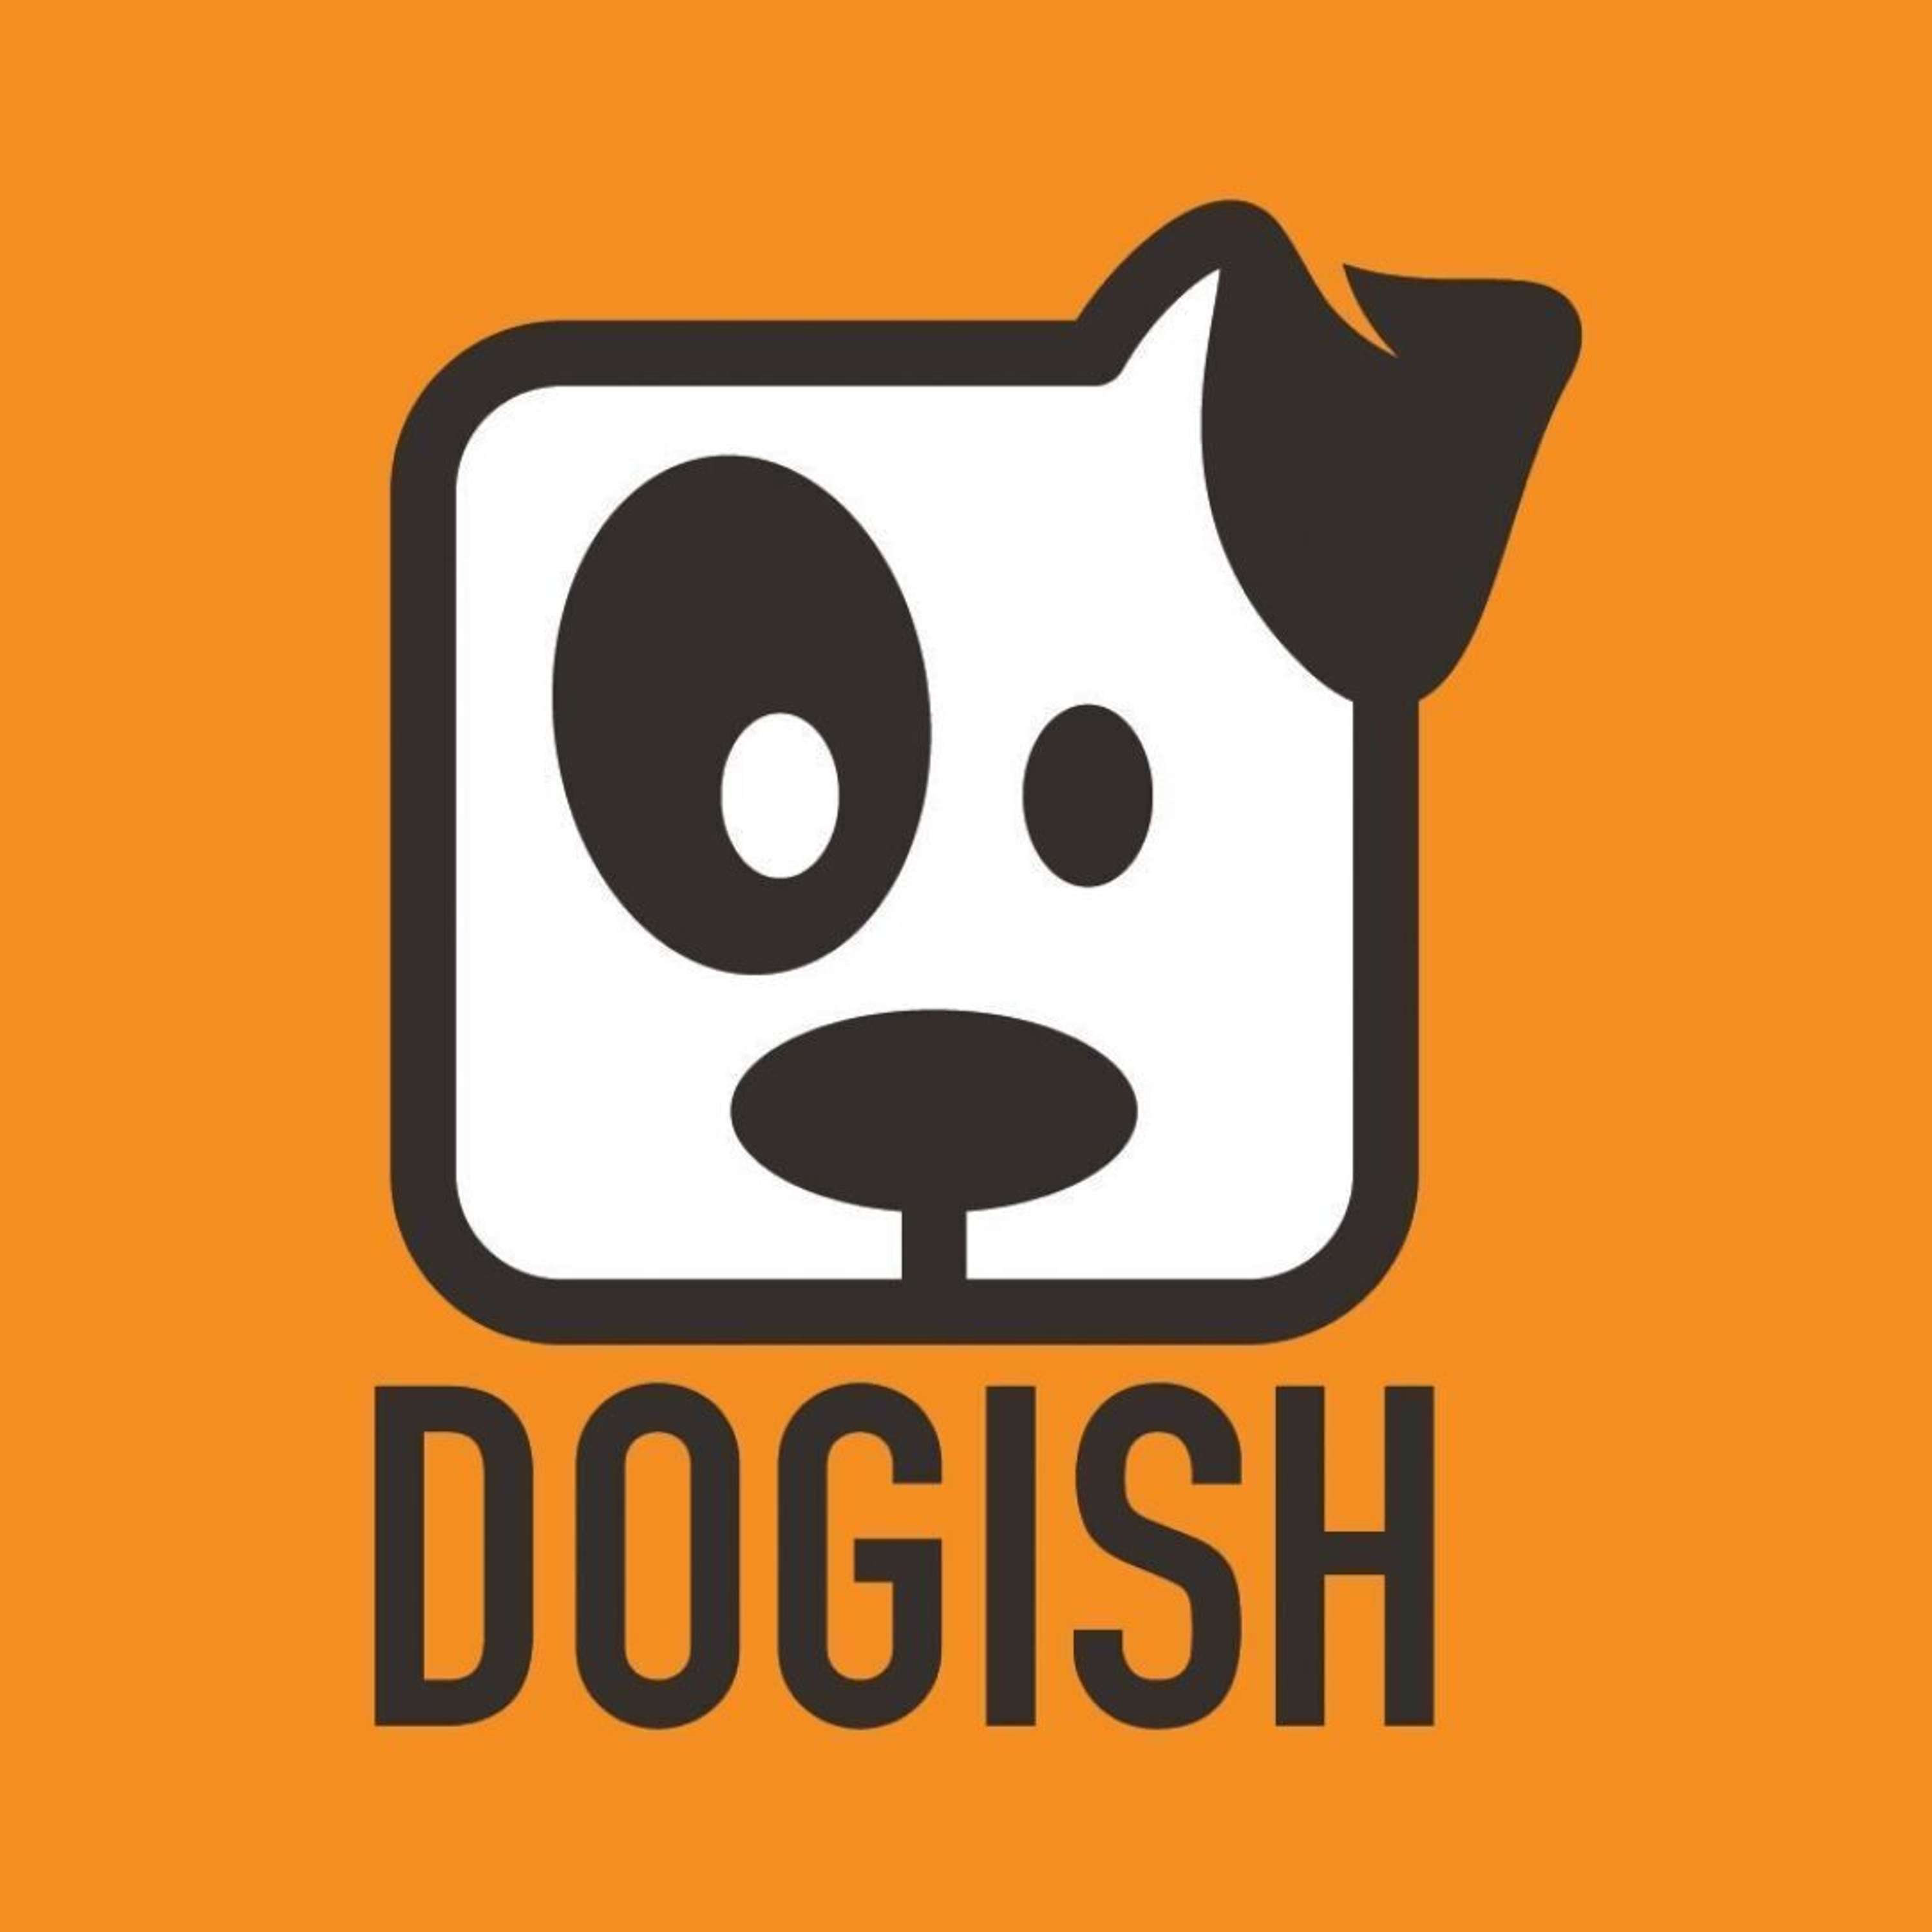 Dogish Podcast - Veterinary Nurses, The Unsung Heroes with Truckee Meadows Community College 09/28/21